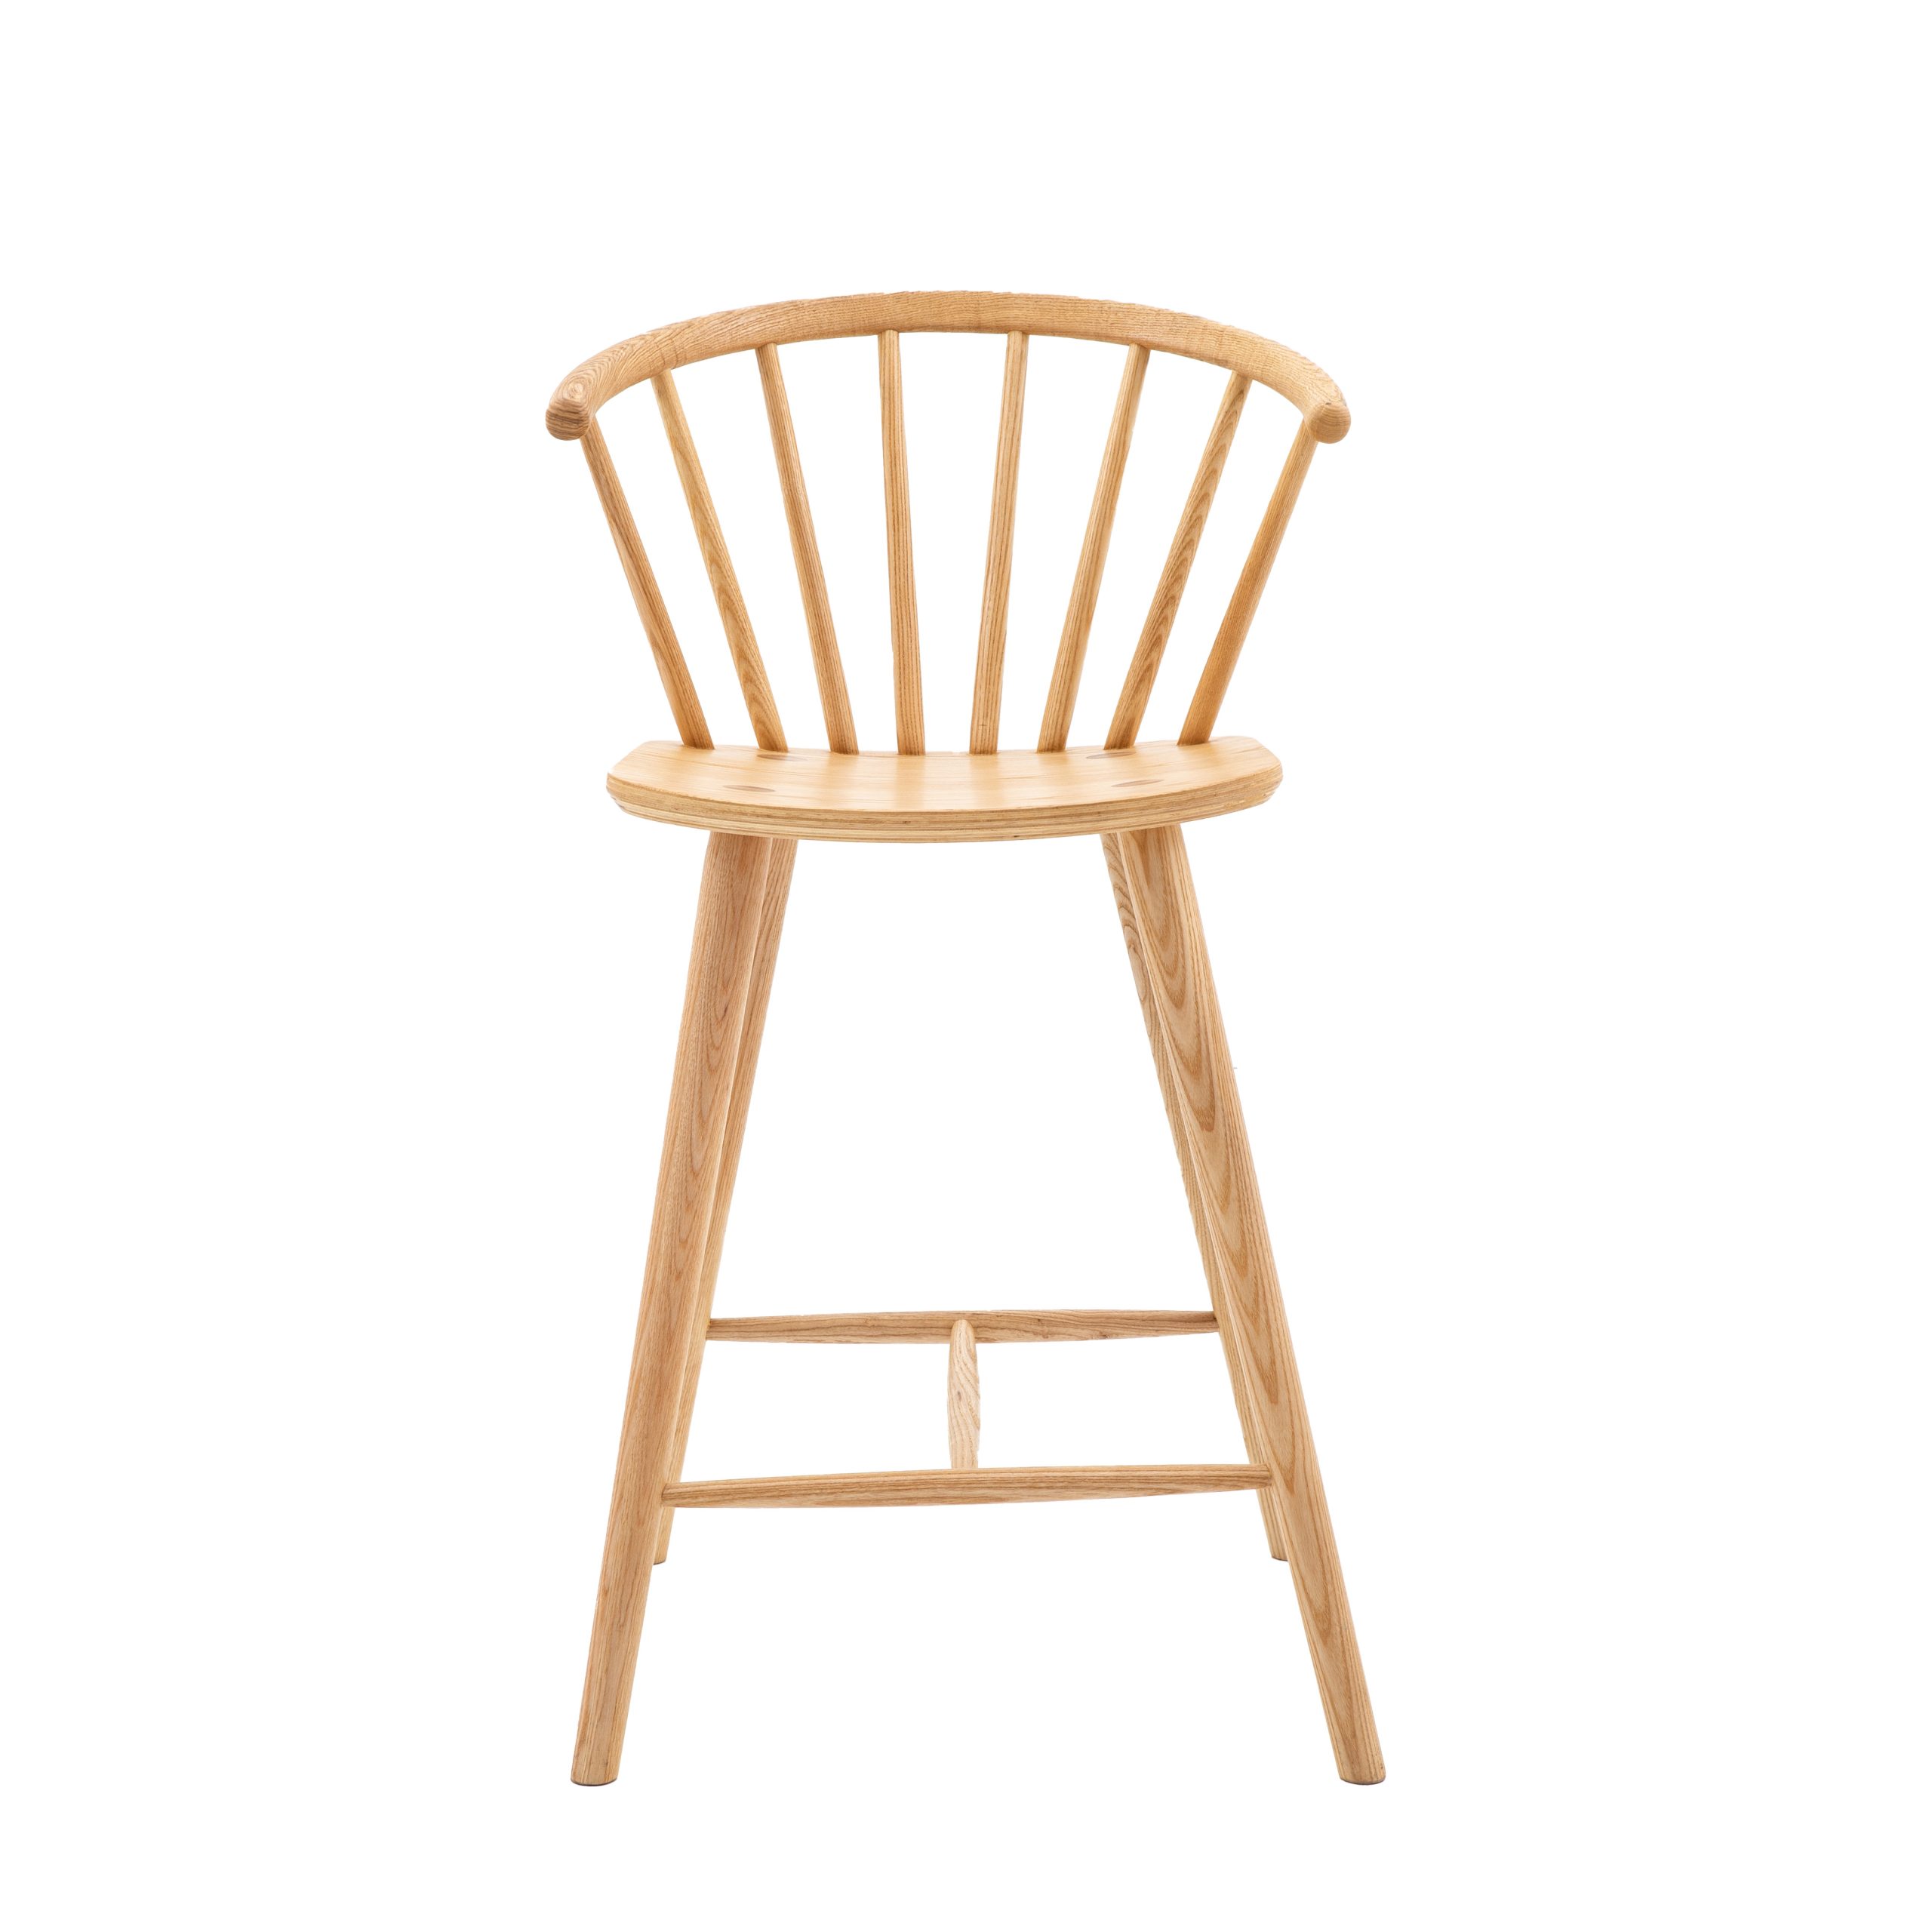 Gallery Direct Craft Barstool Natural